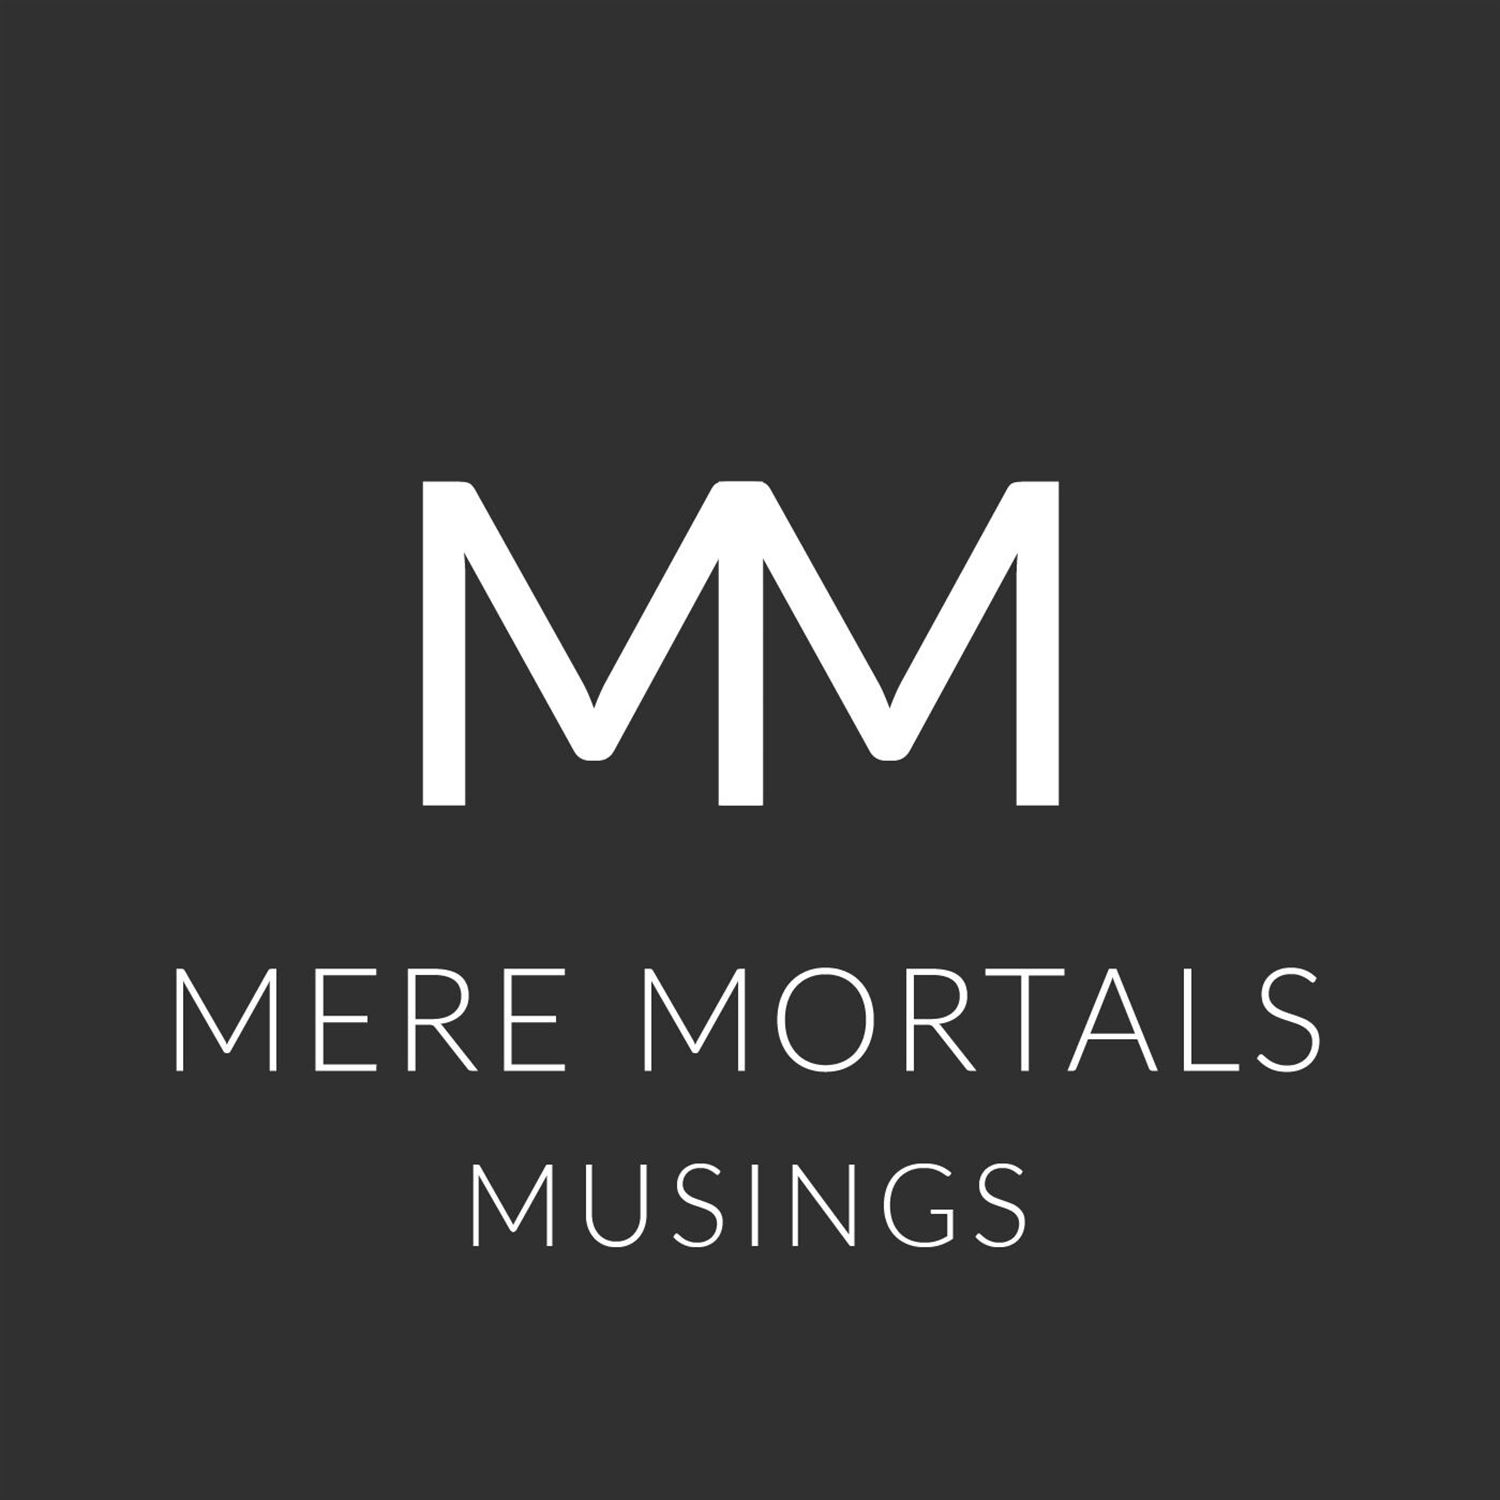 The Power of Story (Mere Mortals Episode #45 - Musings)